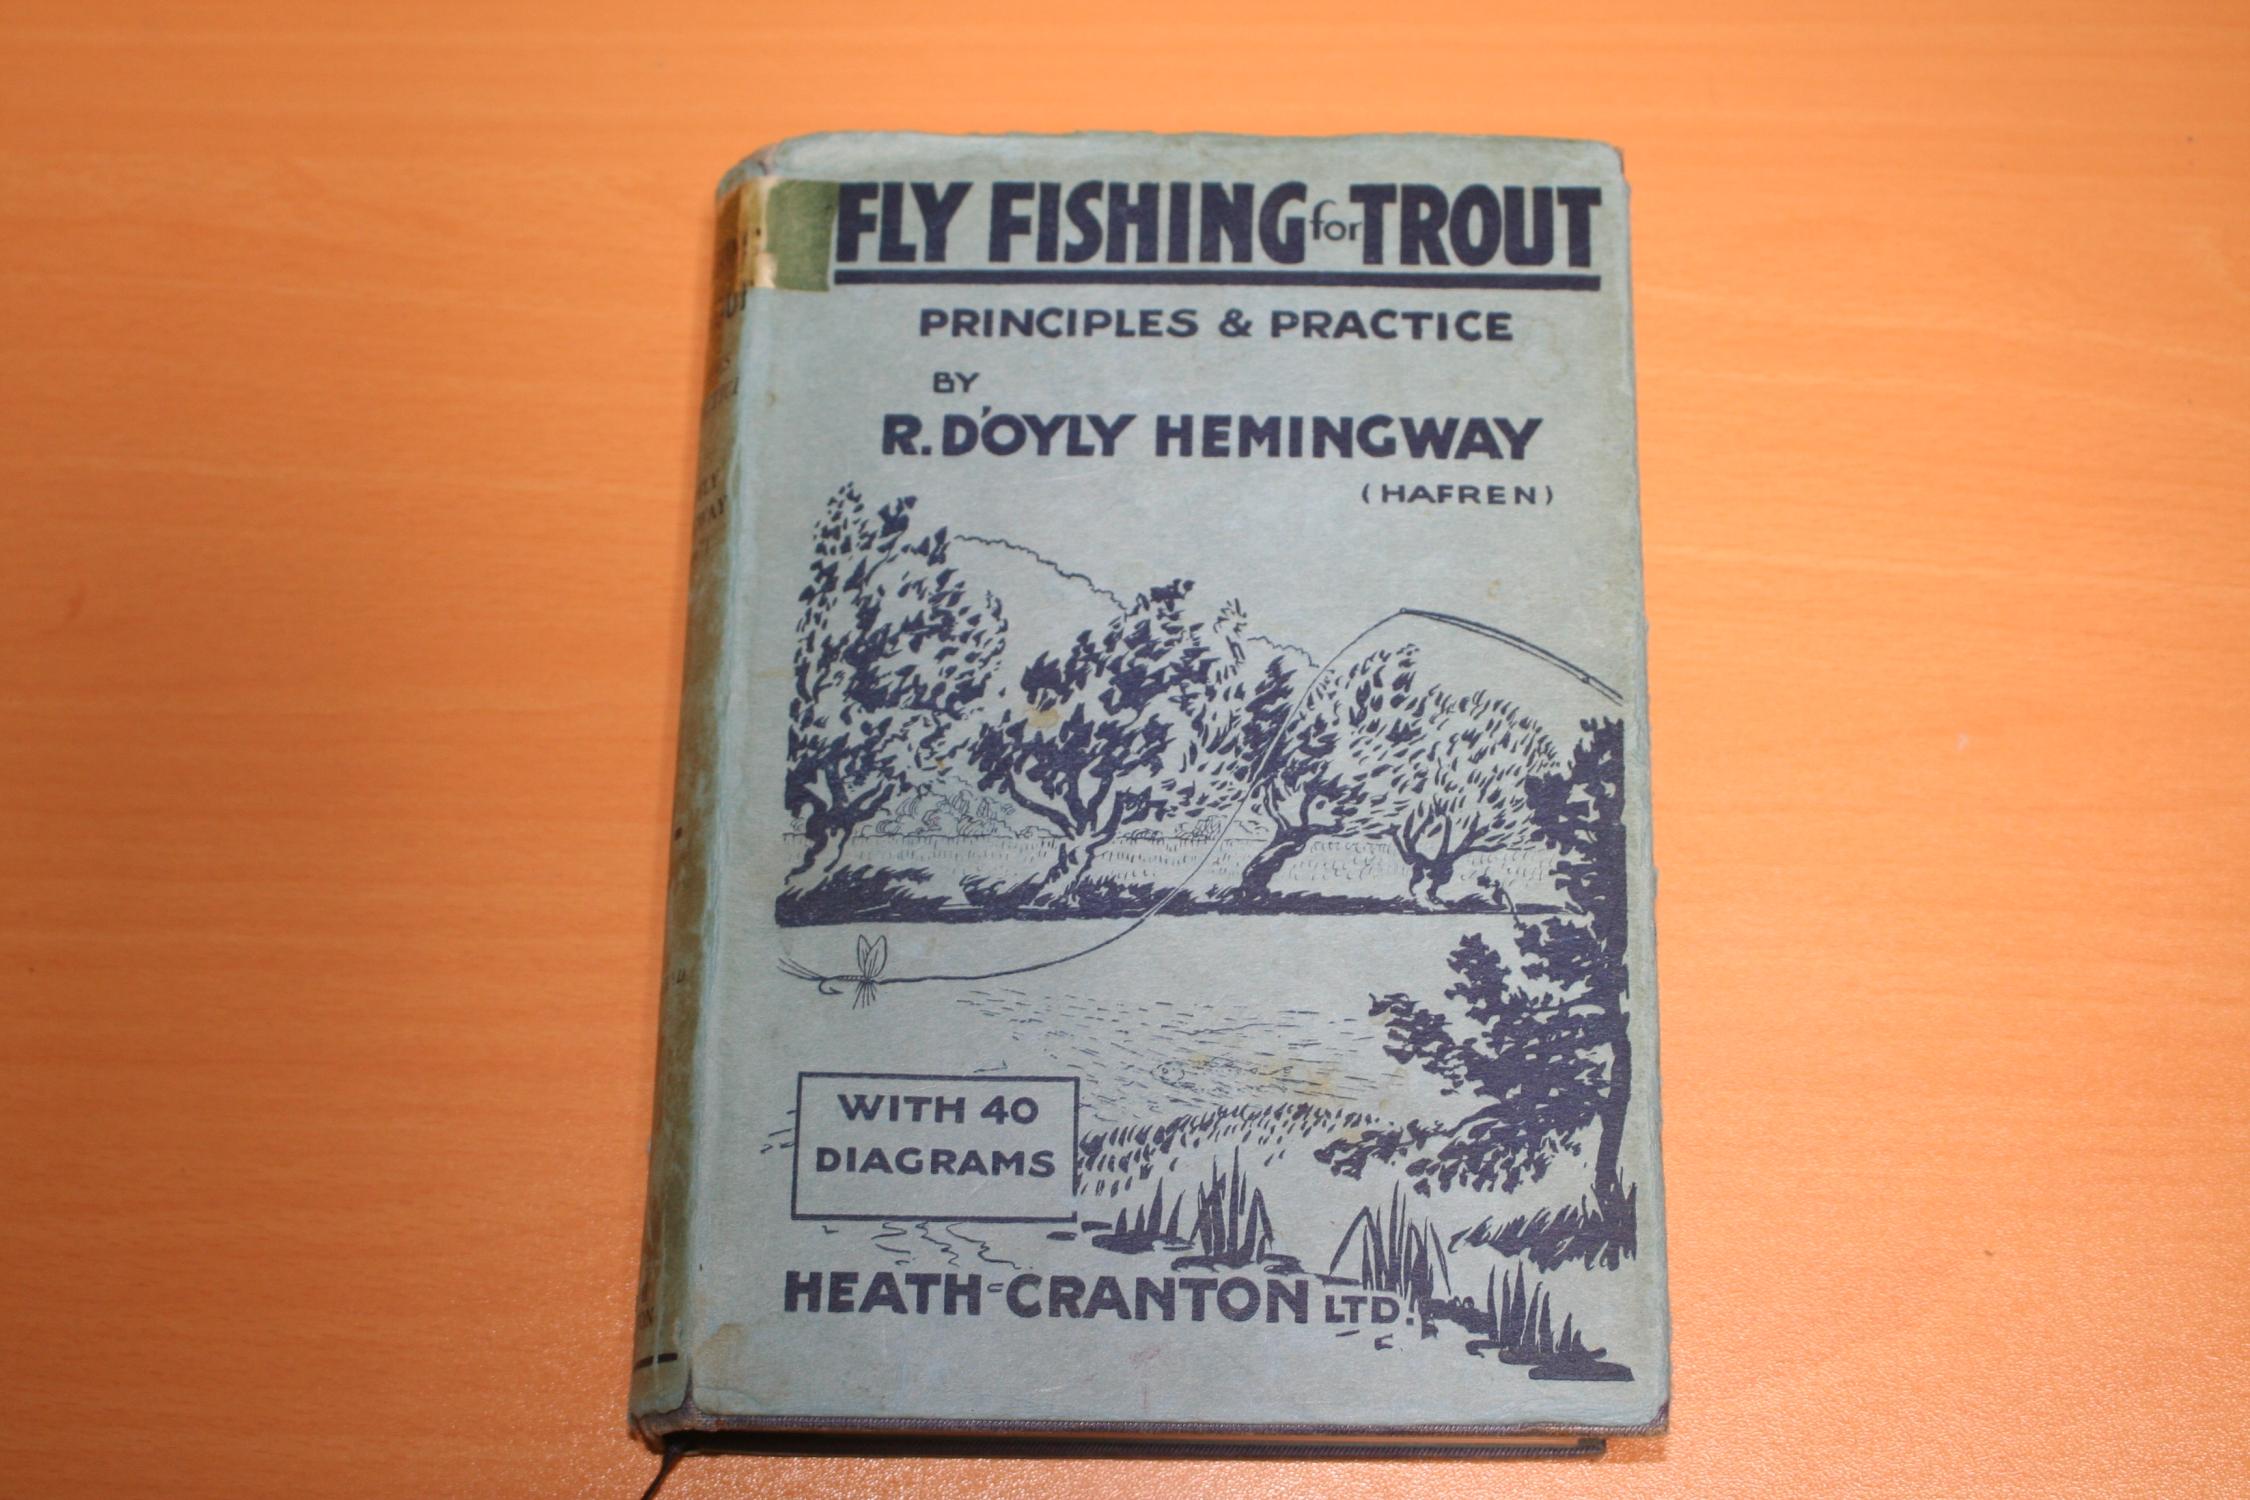 Fly Fishing for Trout. Principles and Practice by D'Oyly Hemingway